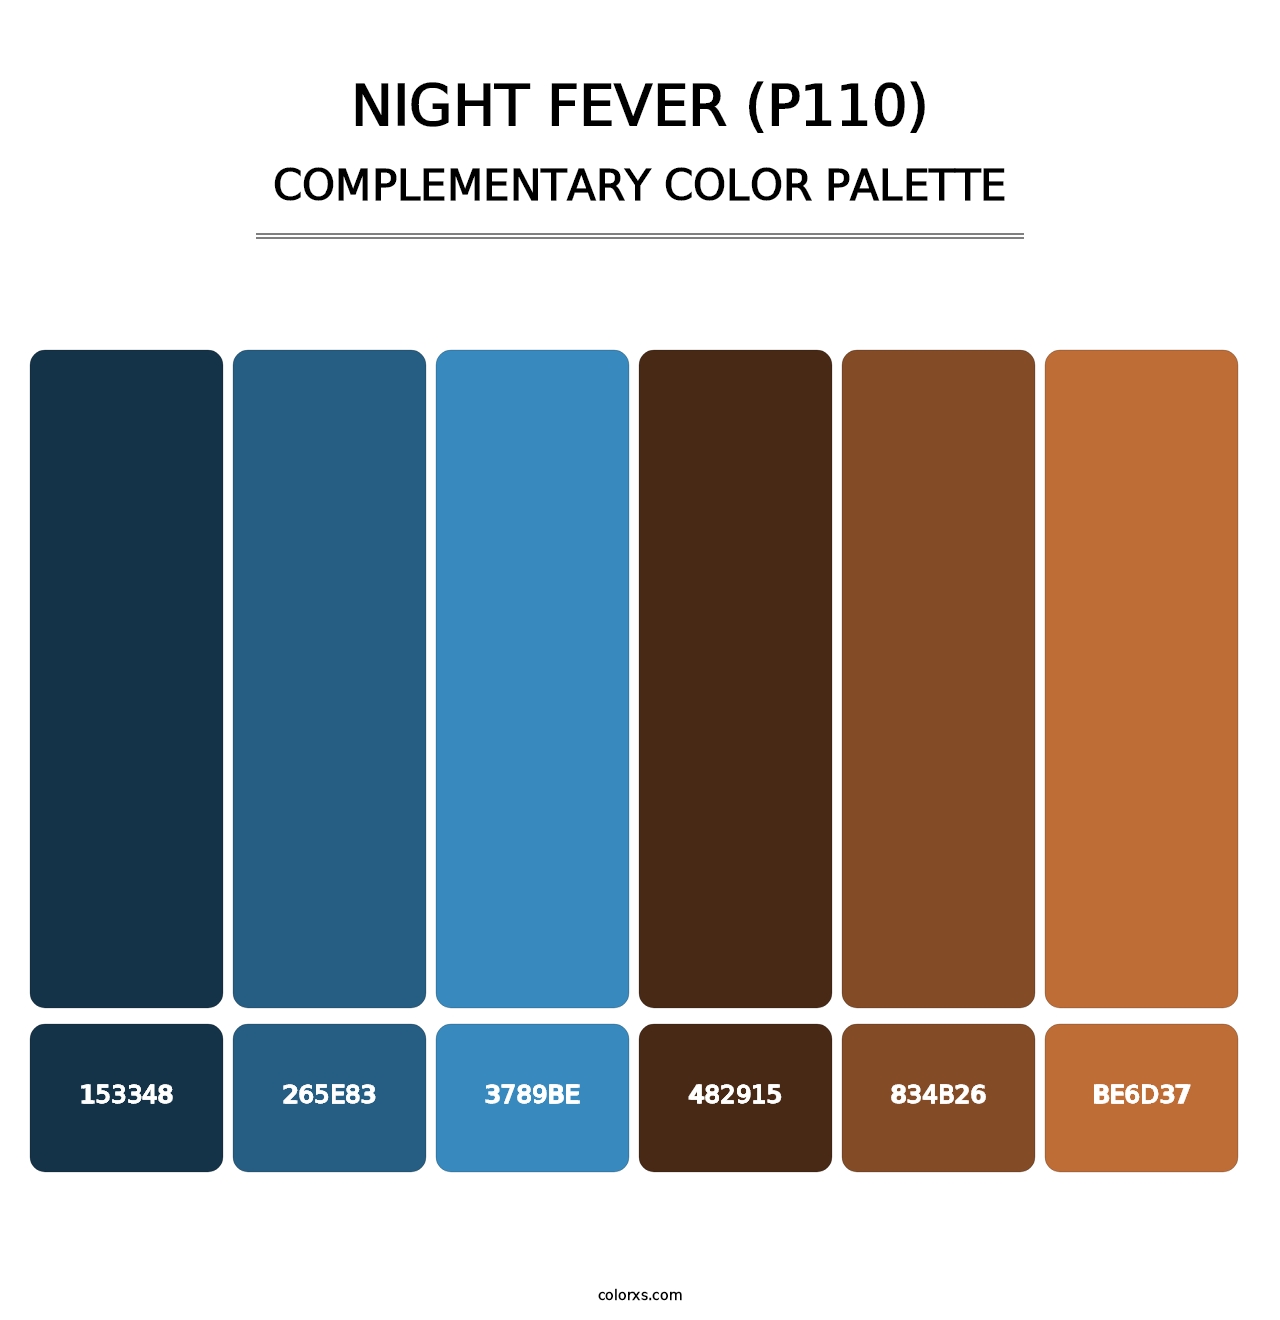 Night Fever (P110) - Complementary Color Palette